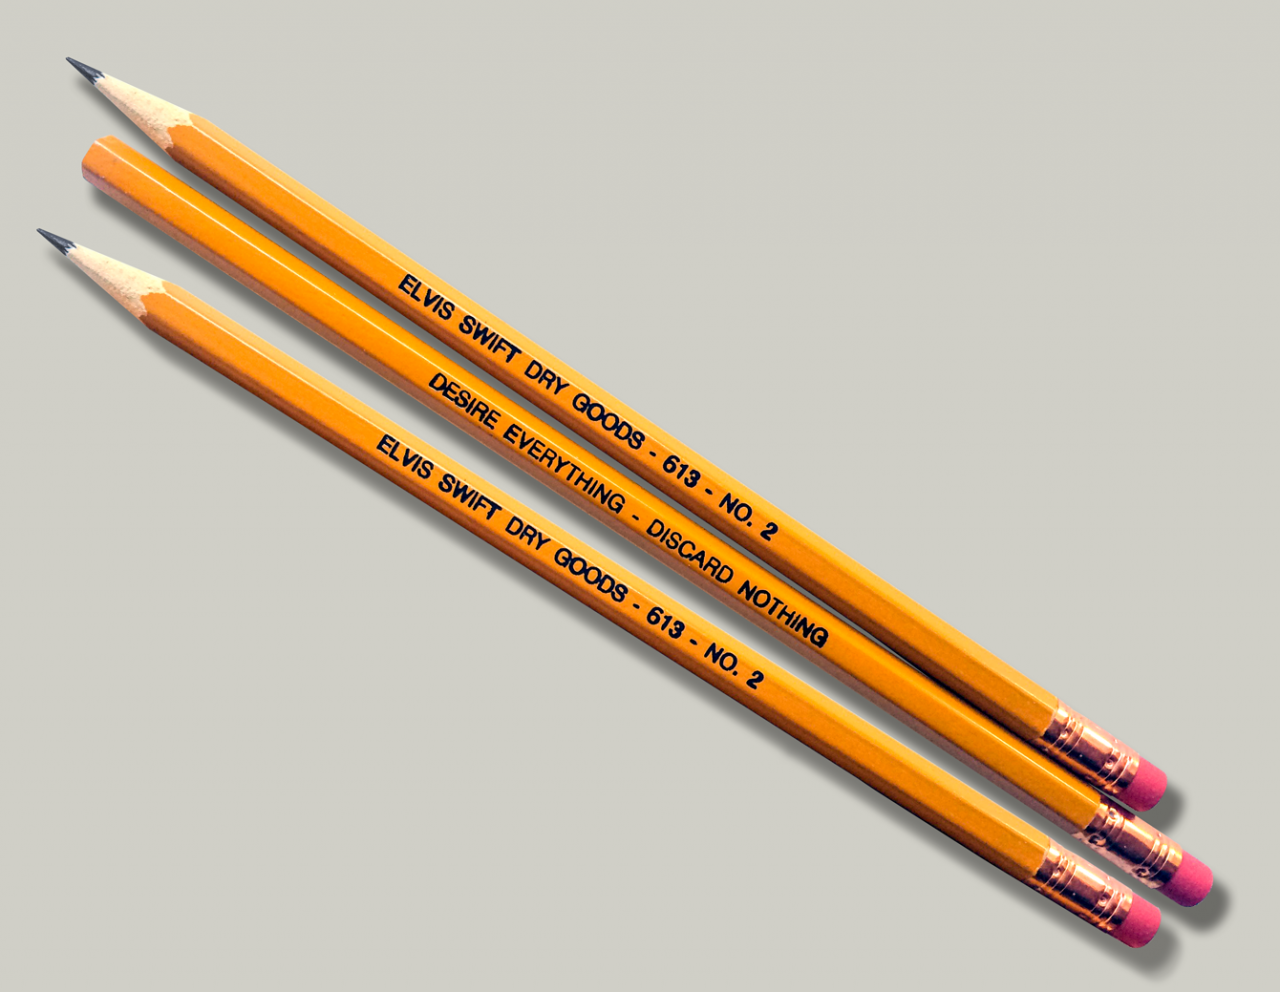 Pencil meaning